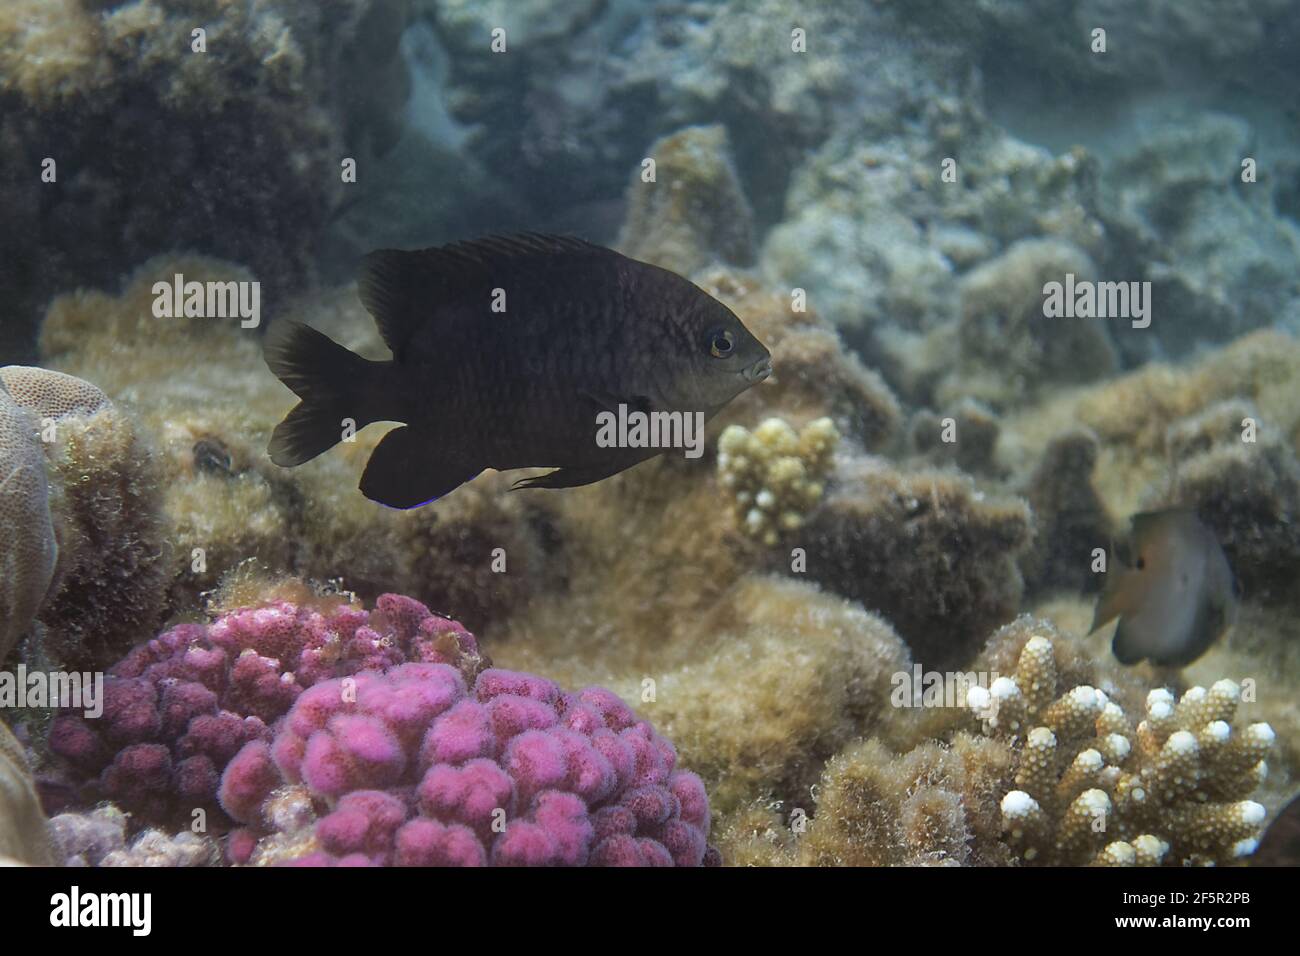 Dusky gregory (Stegastes nigricans) in Red Sea Stock Photo